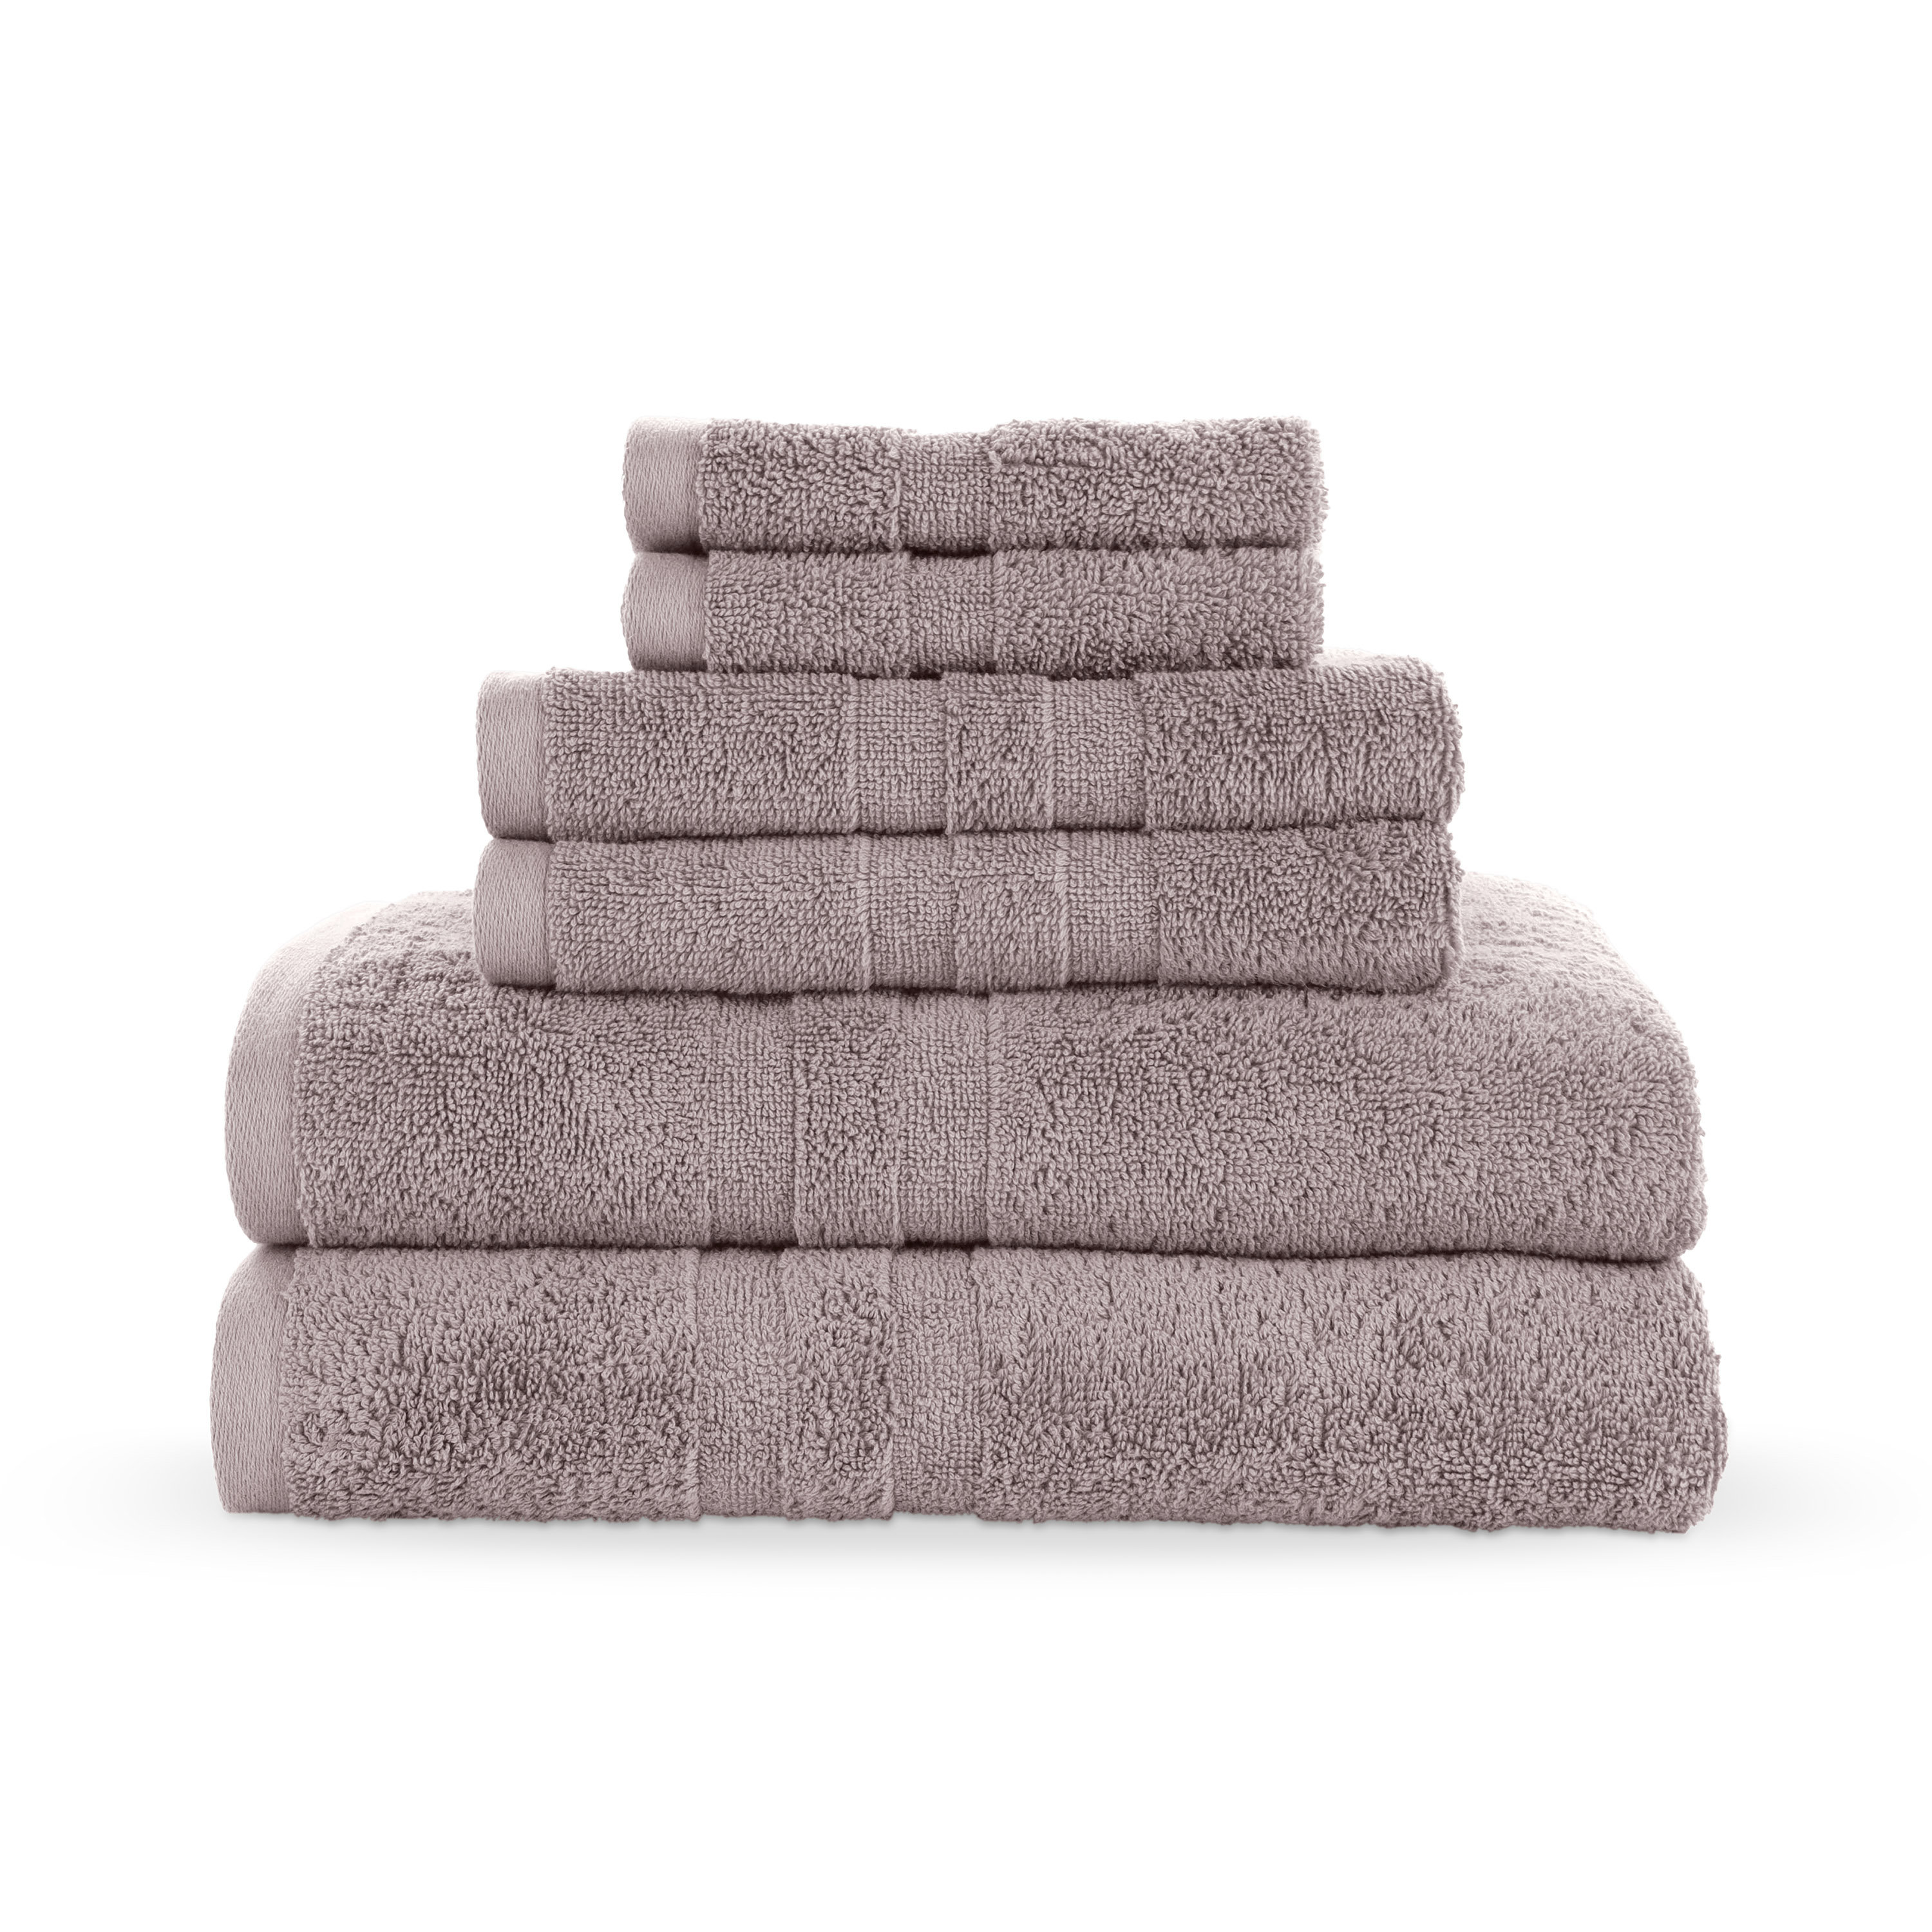 Martex Purity Towel Collection Set - Macy's